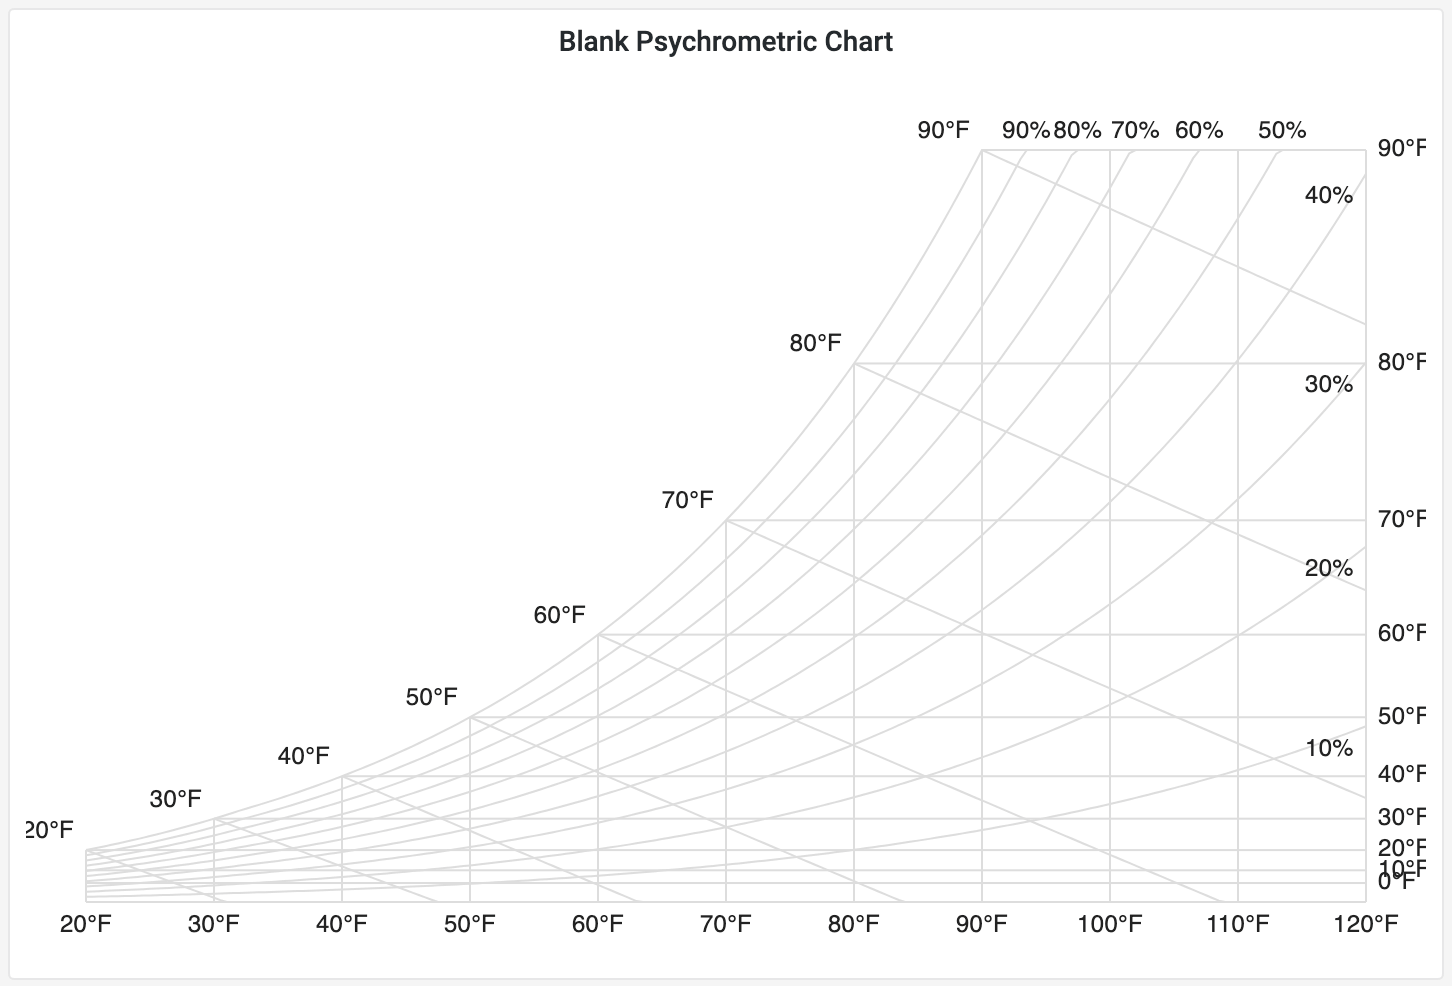 A Blank psychrometric chart, as generated by Psychart.